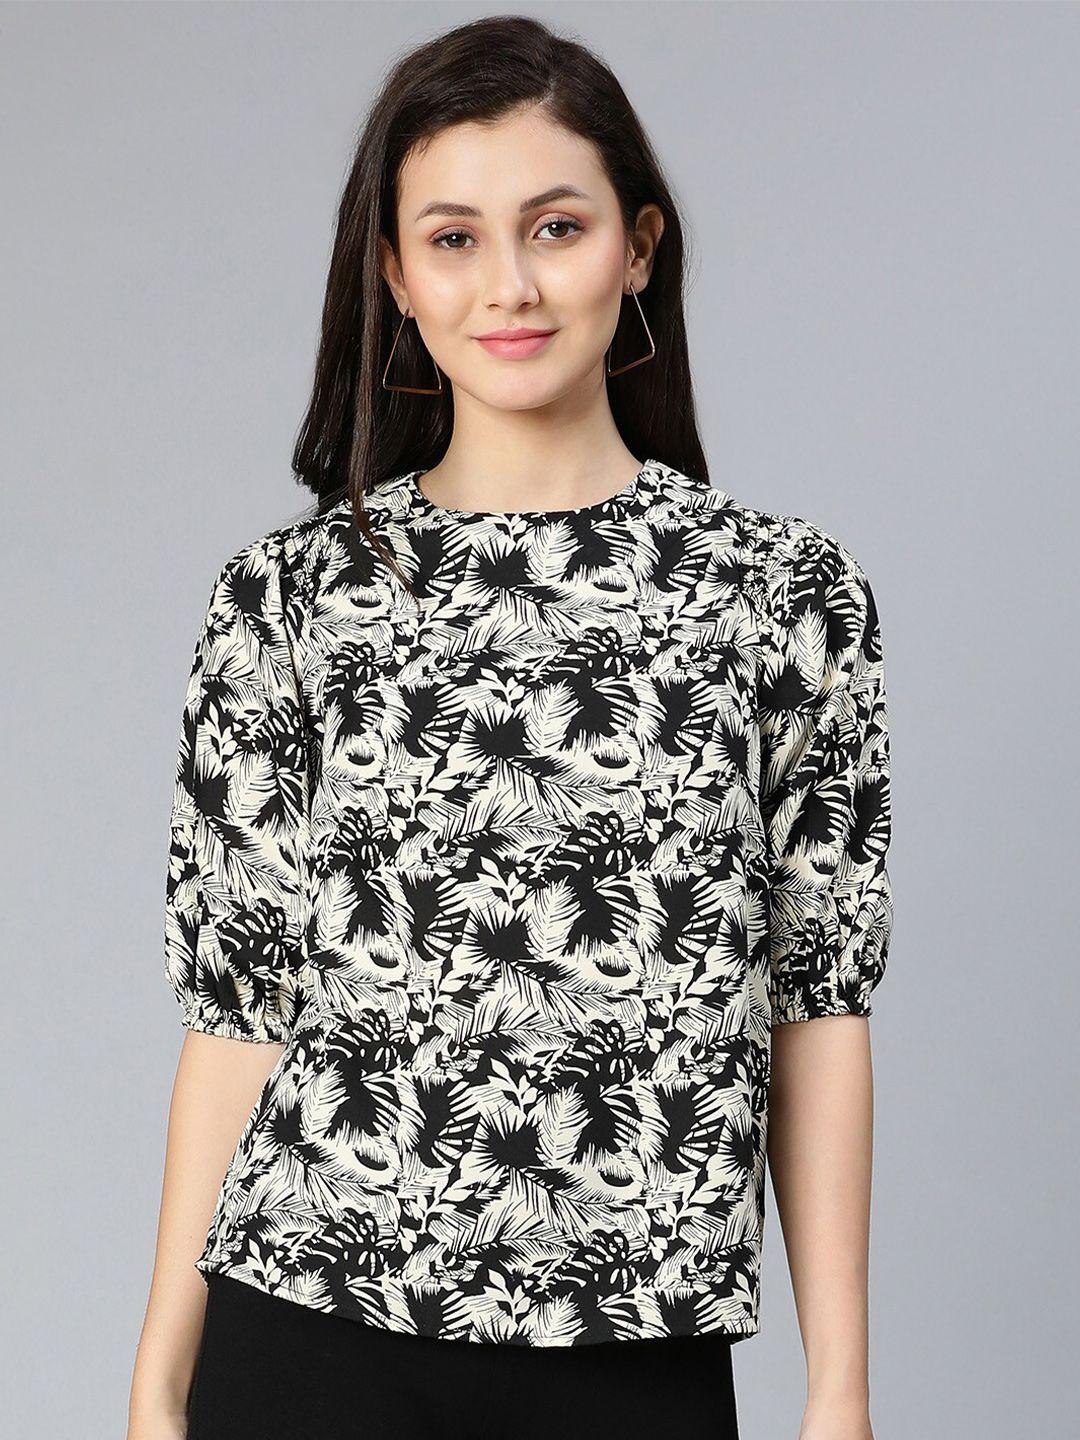 oxolloxo black floral print crepe top